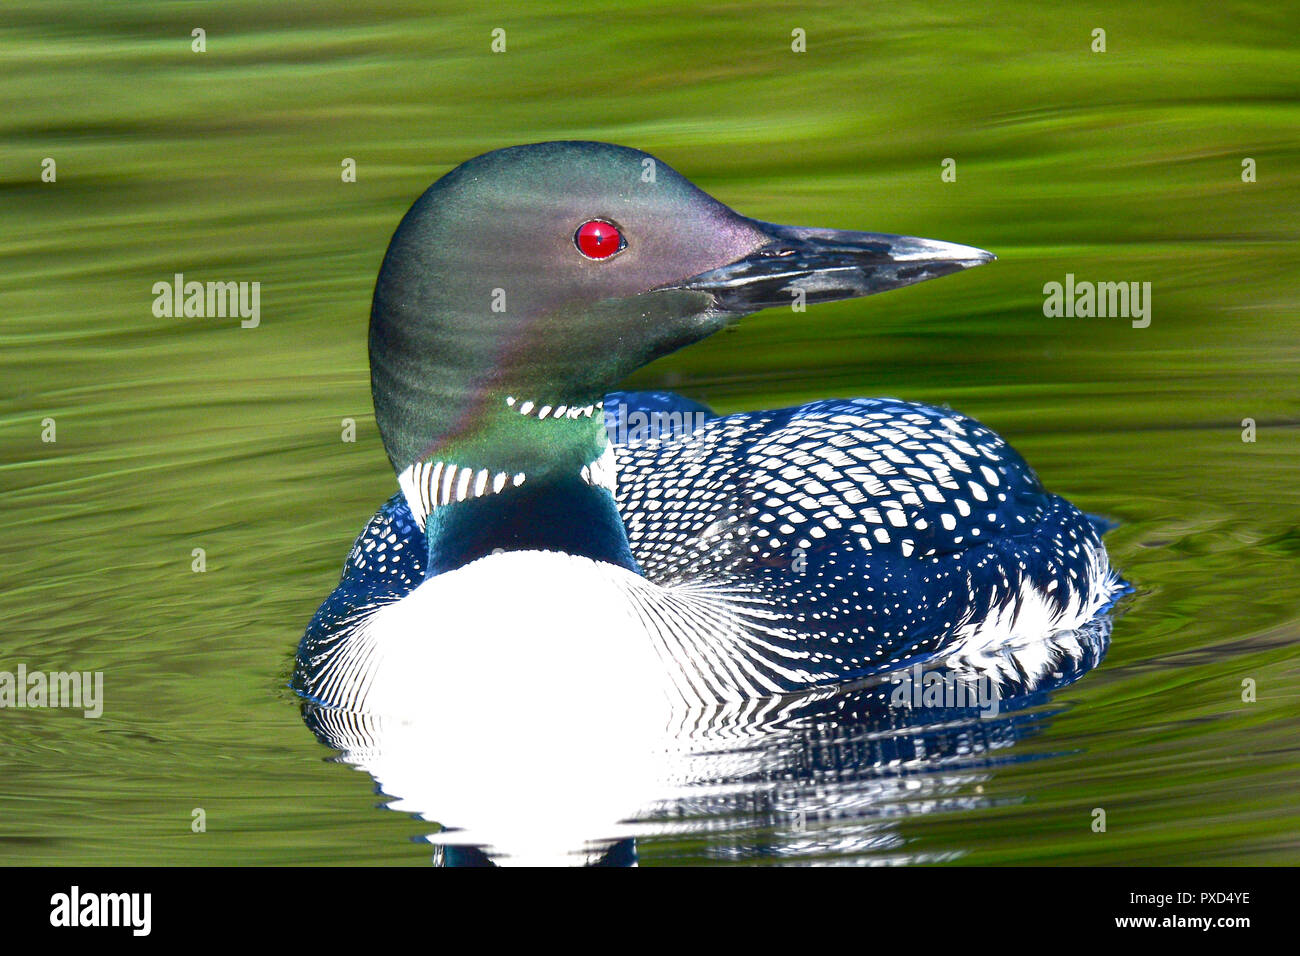 Common Loon image taken at 6:00 am as the sun rose. Stock Photo